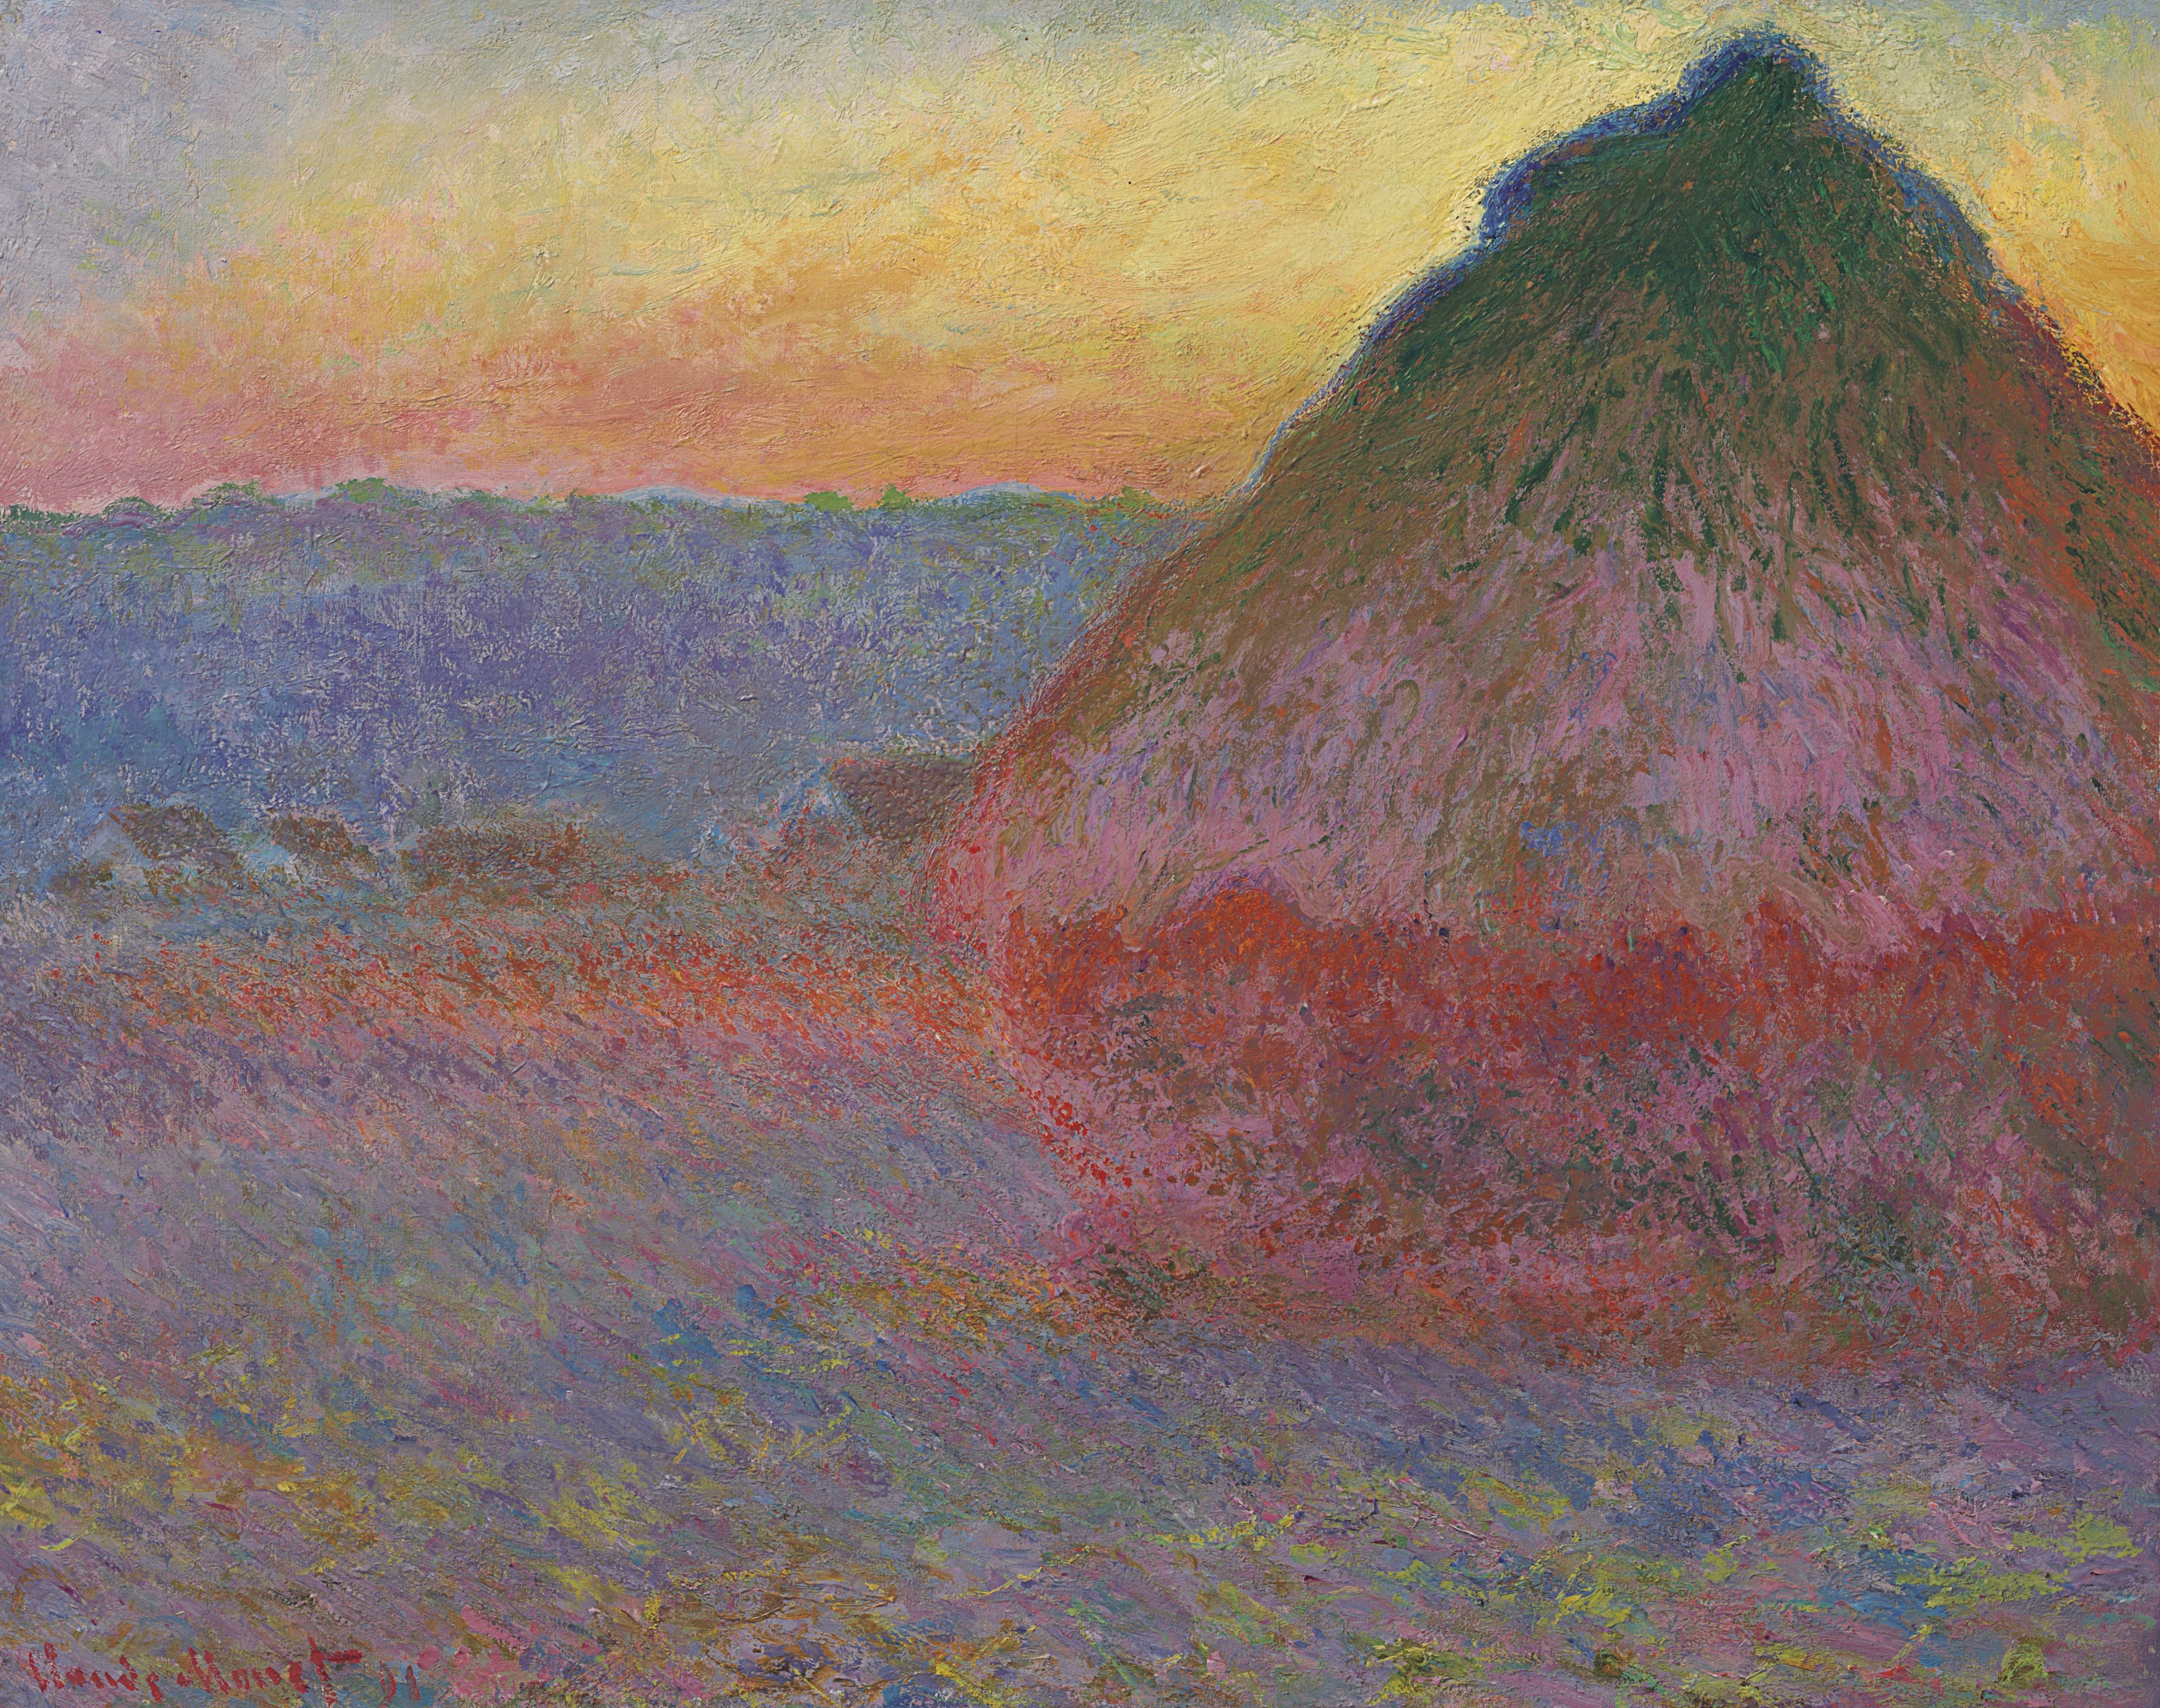 Haystacks by Claude Monet - 1890 private collection